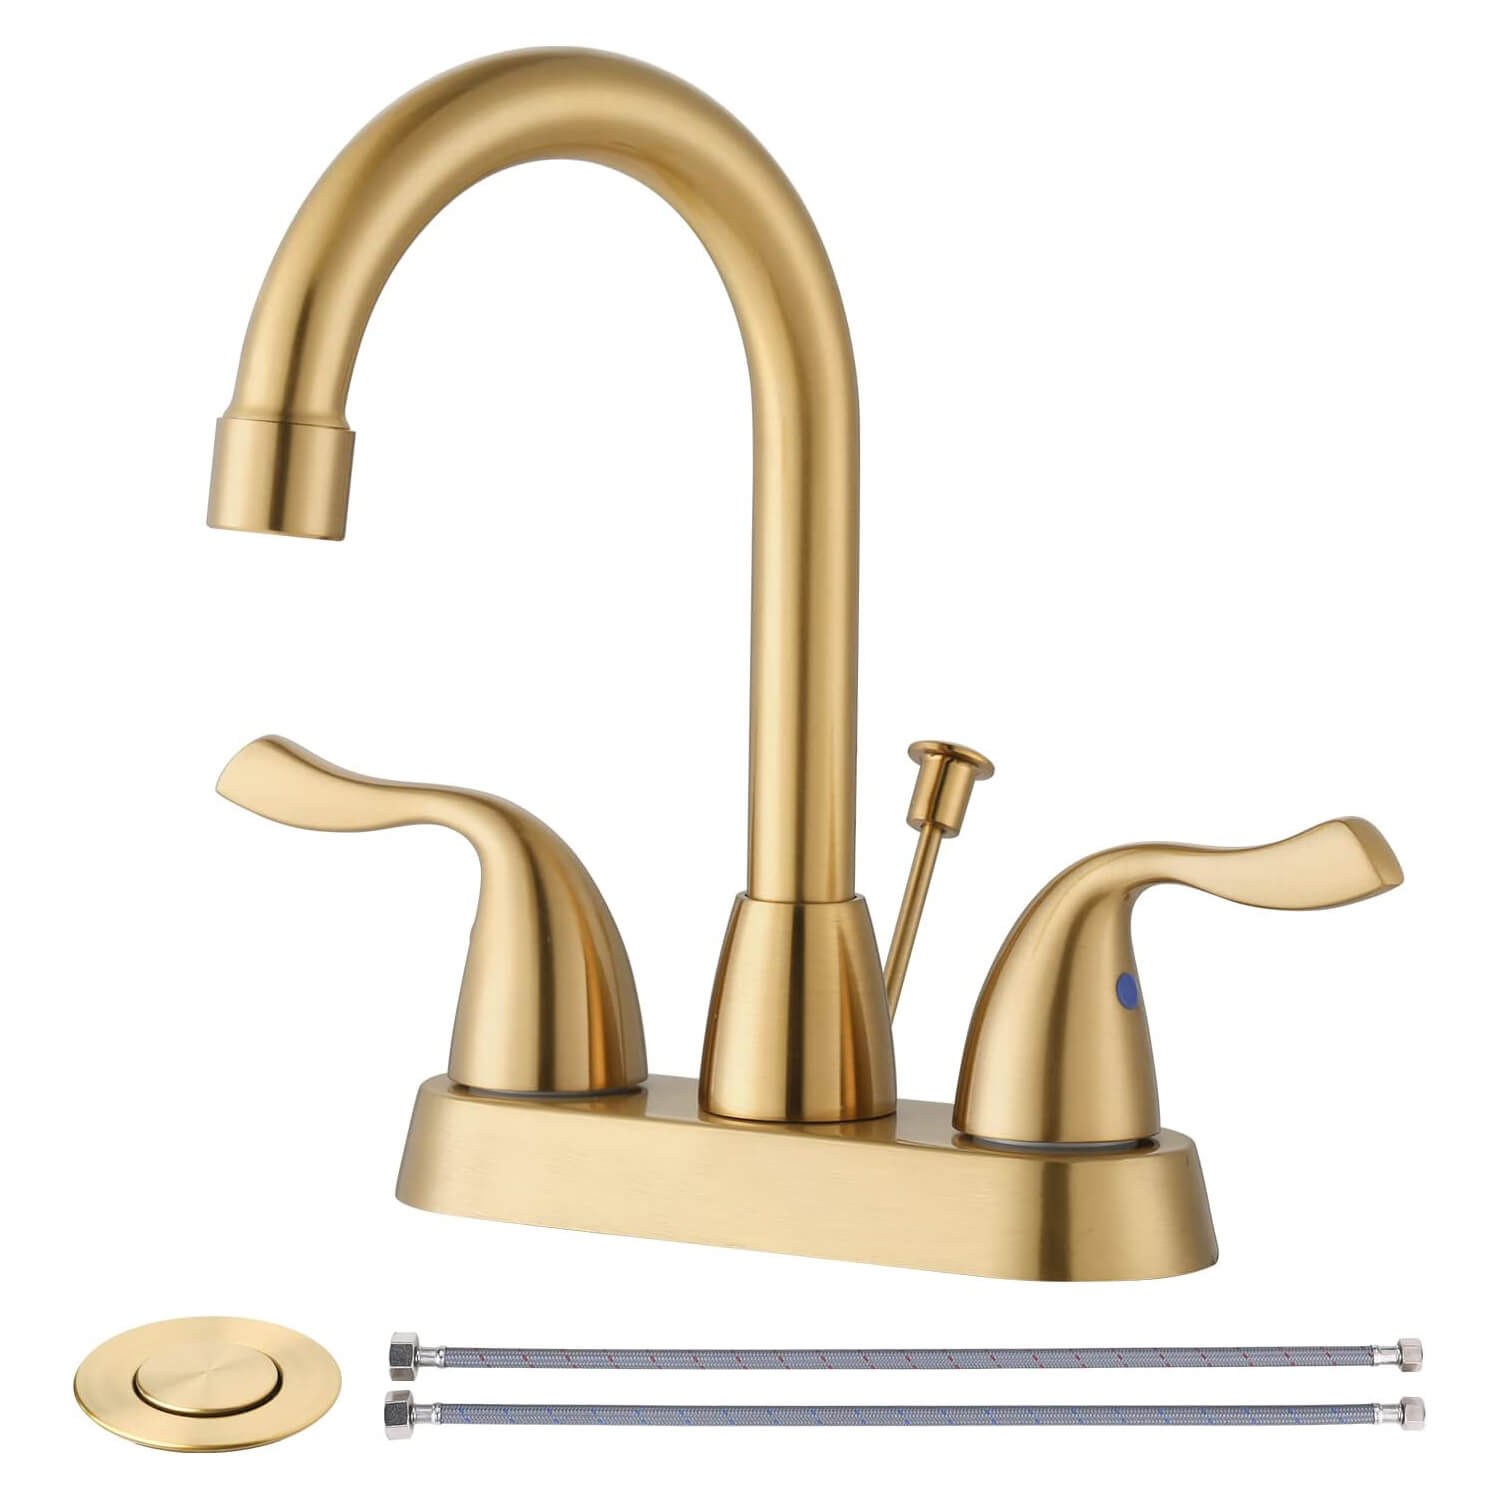 iVIGA Brushed Gold 4 Inch Centerset Bathroom Sink Faucet with Drain Assembly and Supply Hoses